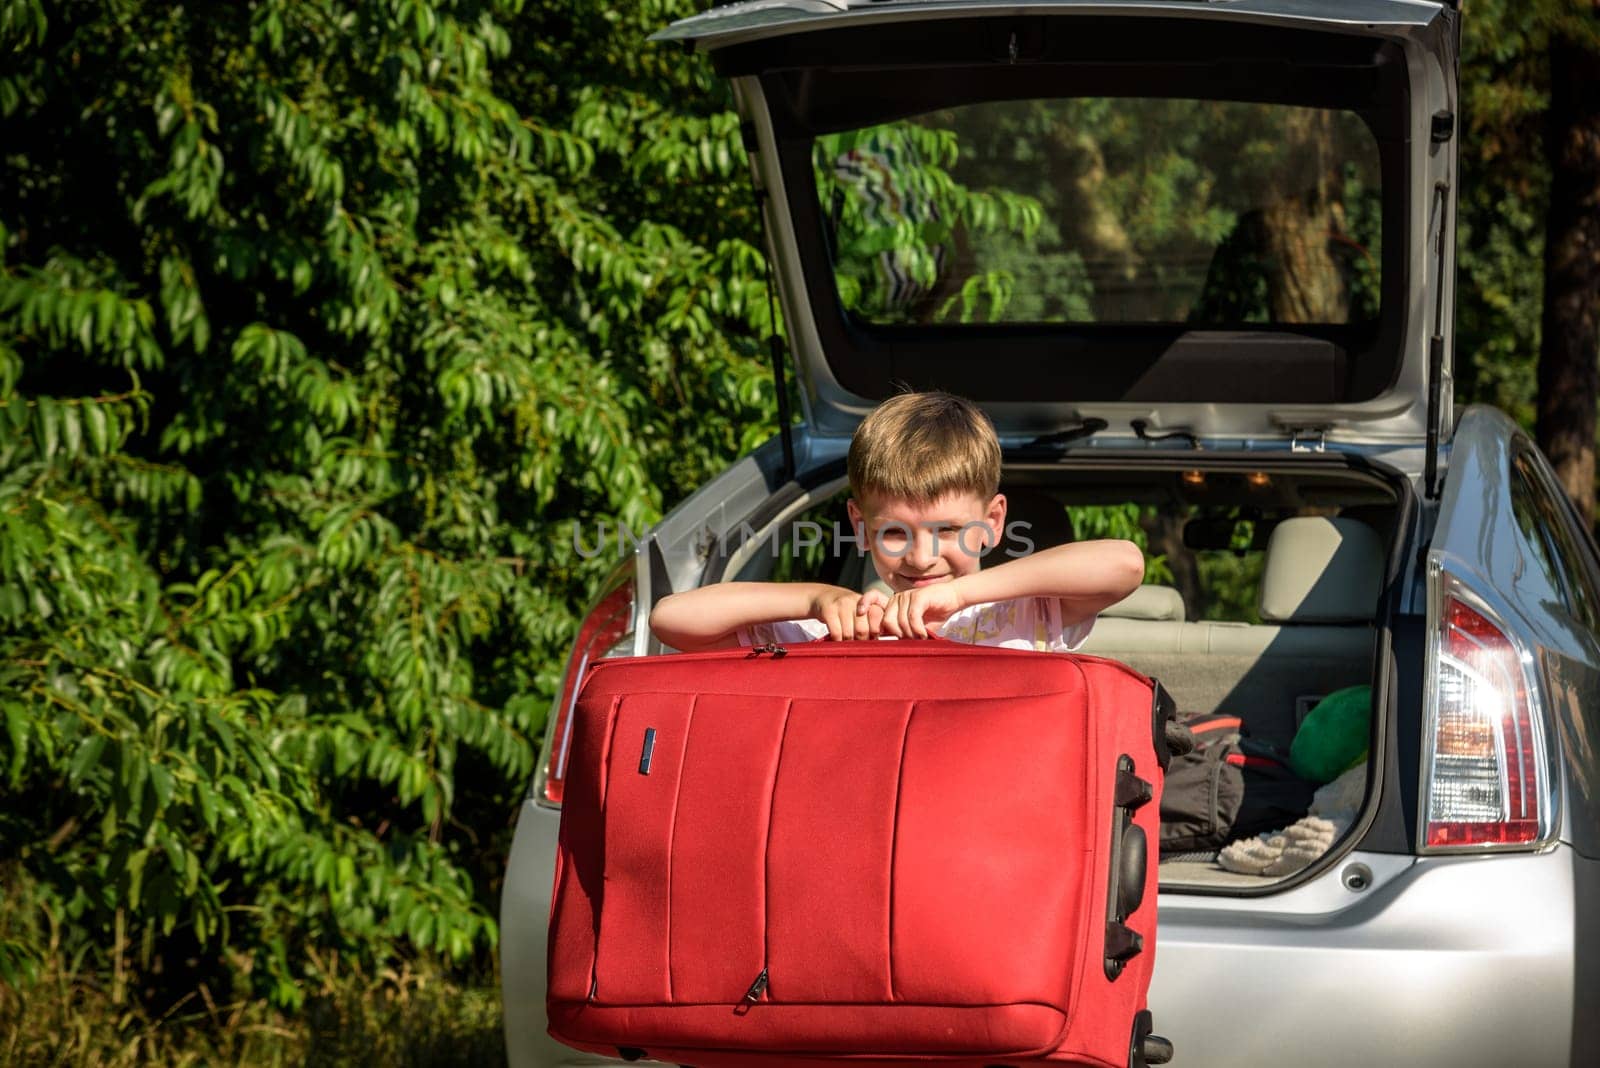 Pretty boy loading the luggage in the trunk of the car. Kid looking forward for a road trip or travel. Family travel by car.